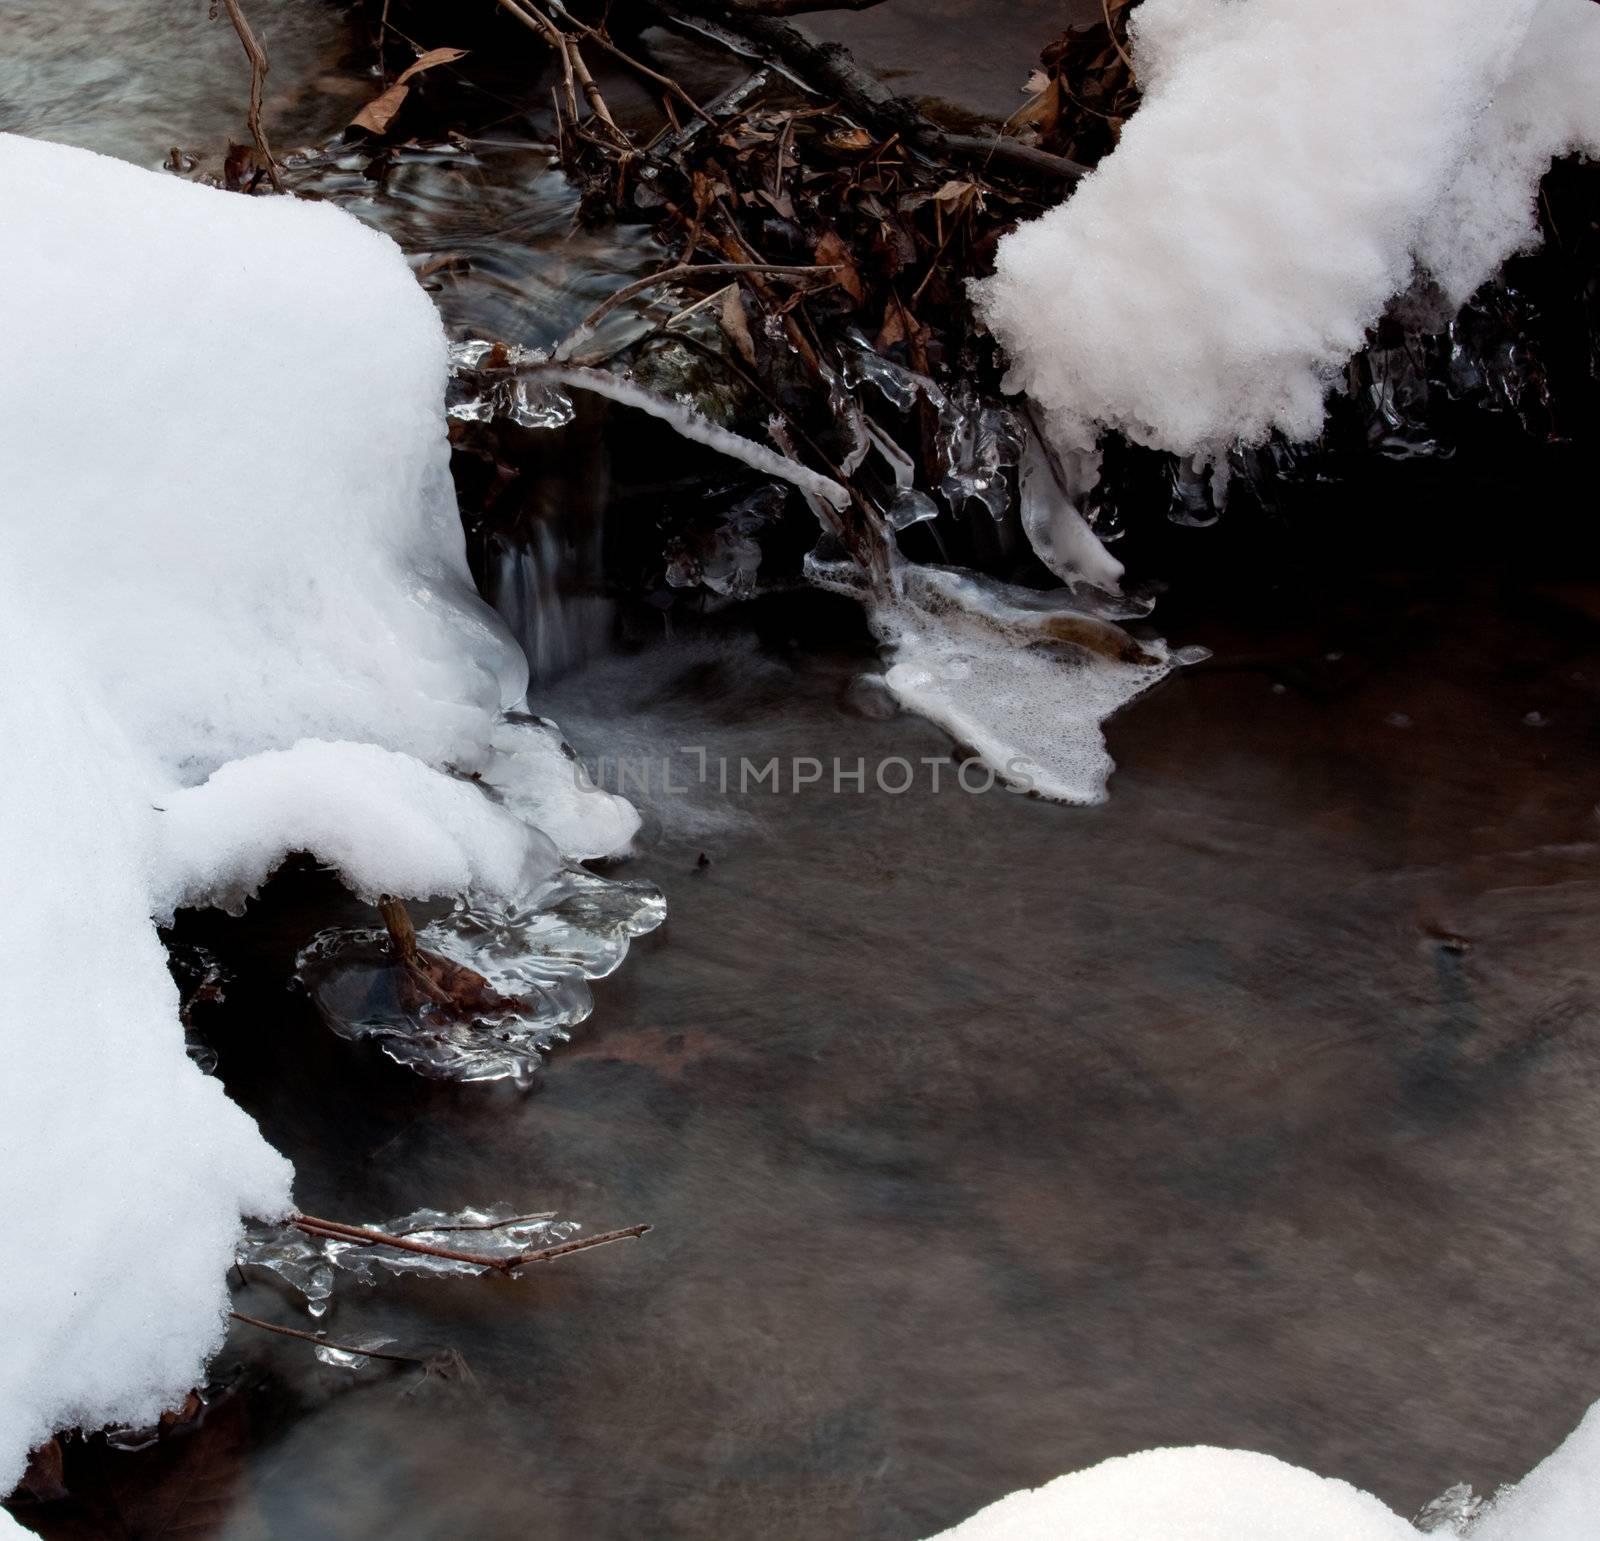 Small snow lined stream by steheap